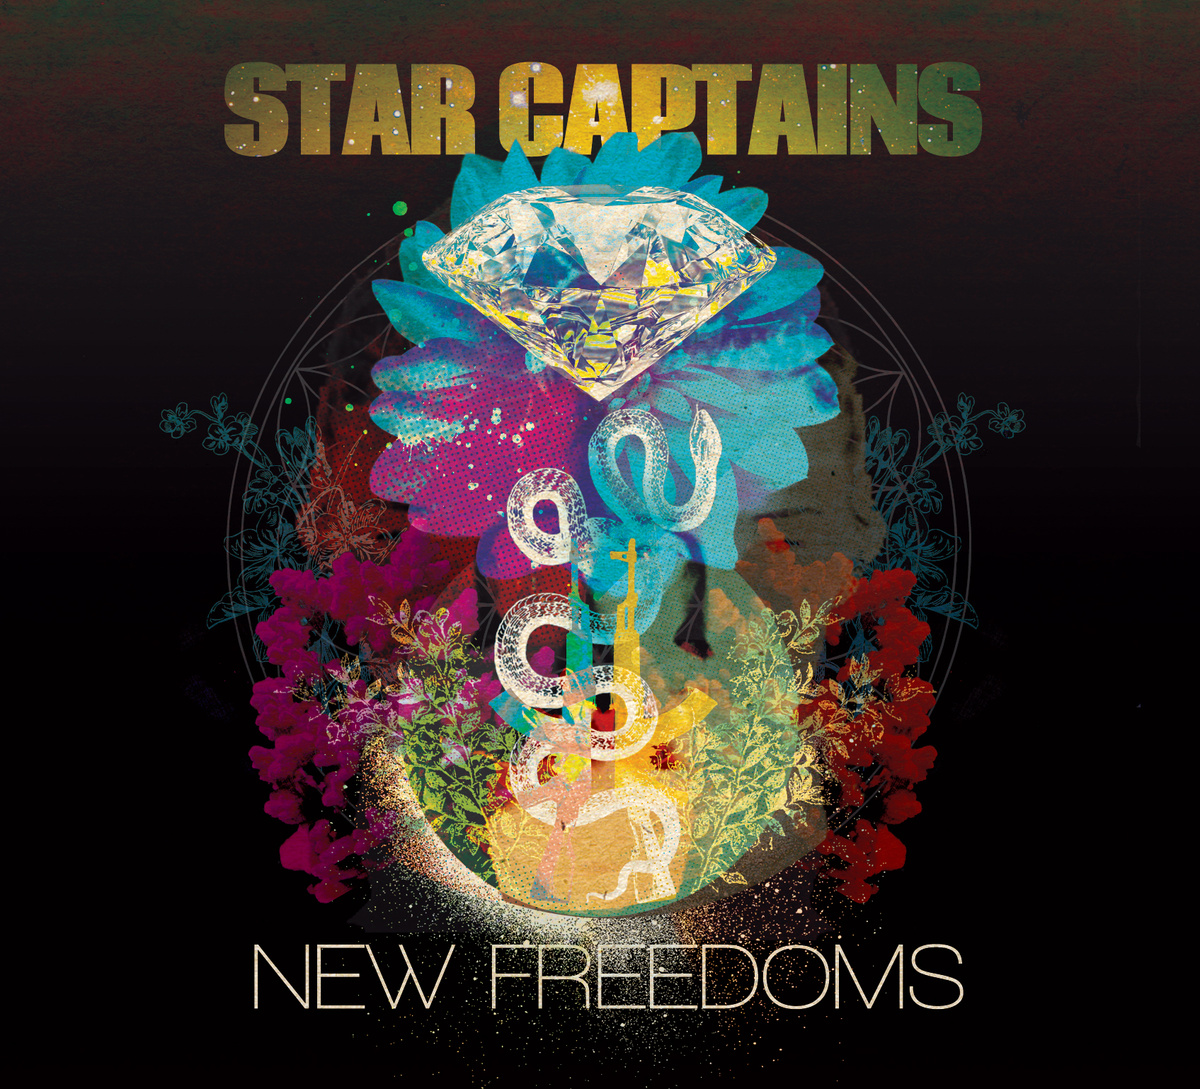 Star Captains - "New Freedoms" (Release) & "Love Is" (Video)